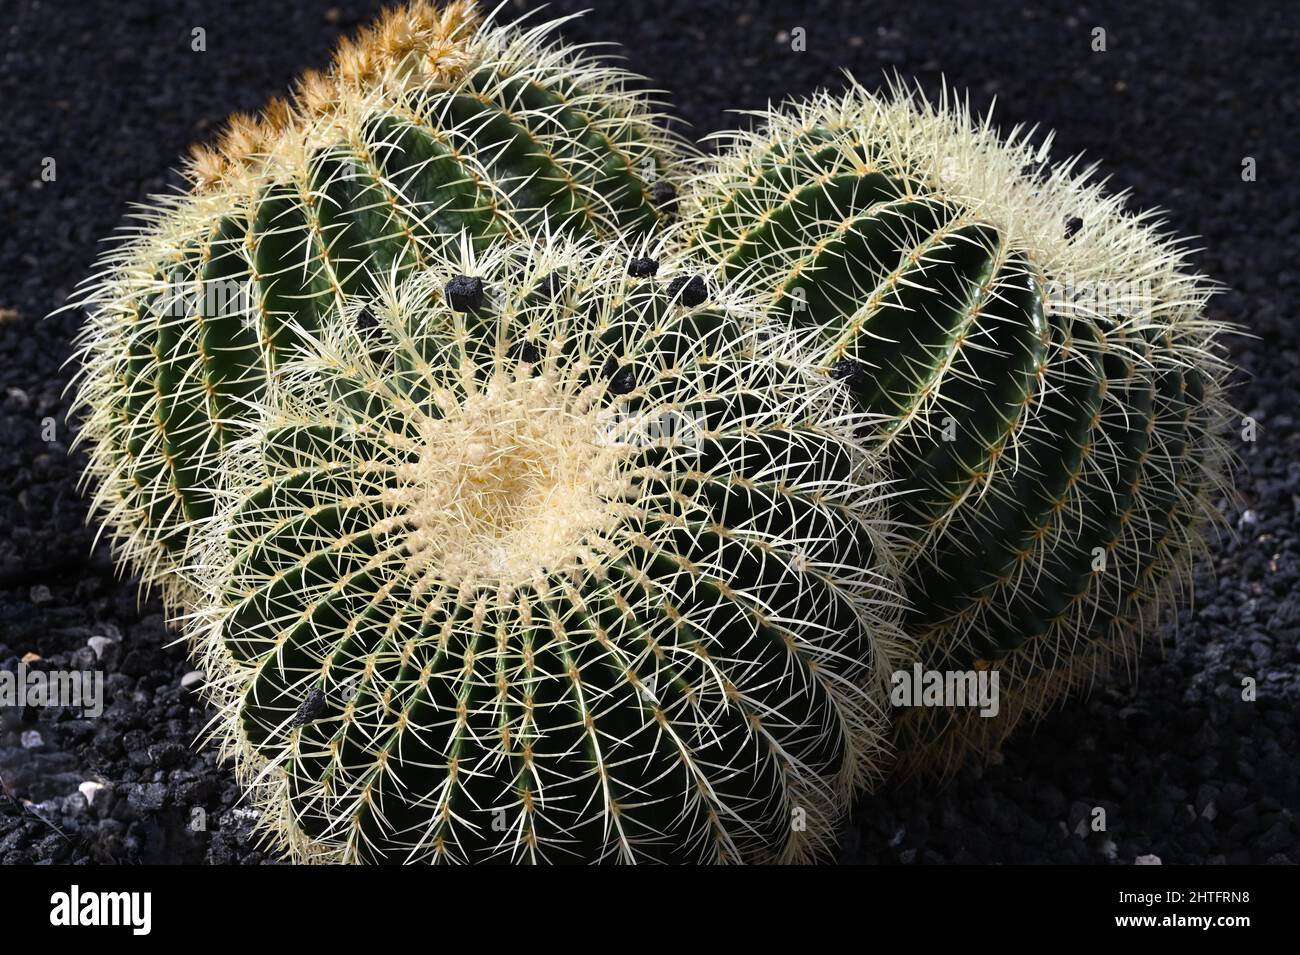 A trio, three, 3 of golden barrel cacti, cactuses, Echinocactus grusonii from the Plantae kingdom, dark green with yellow spines Stock Photo